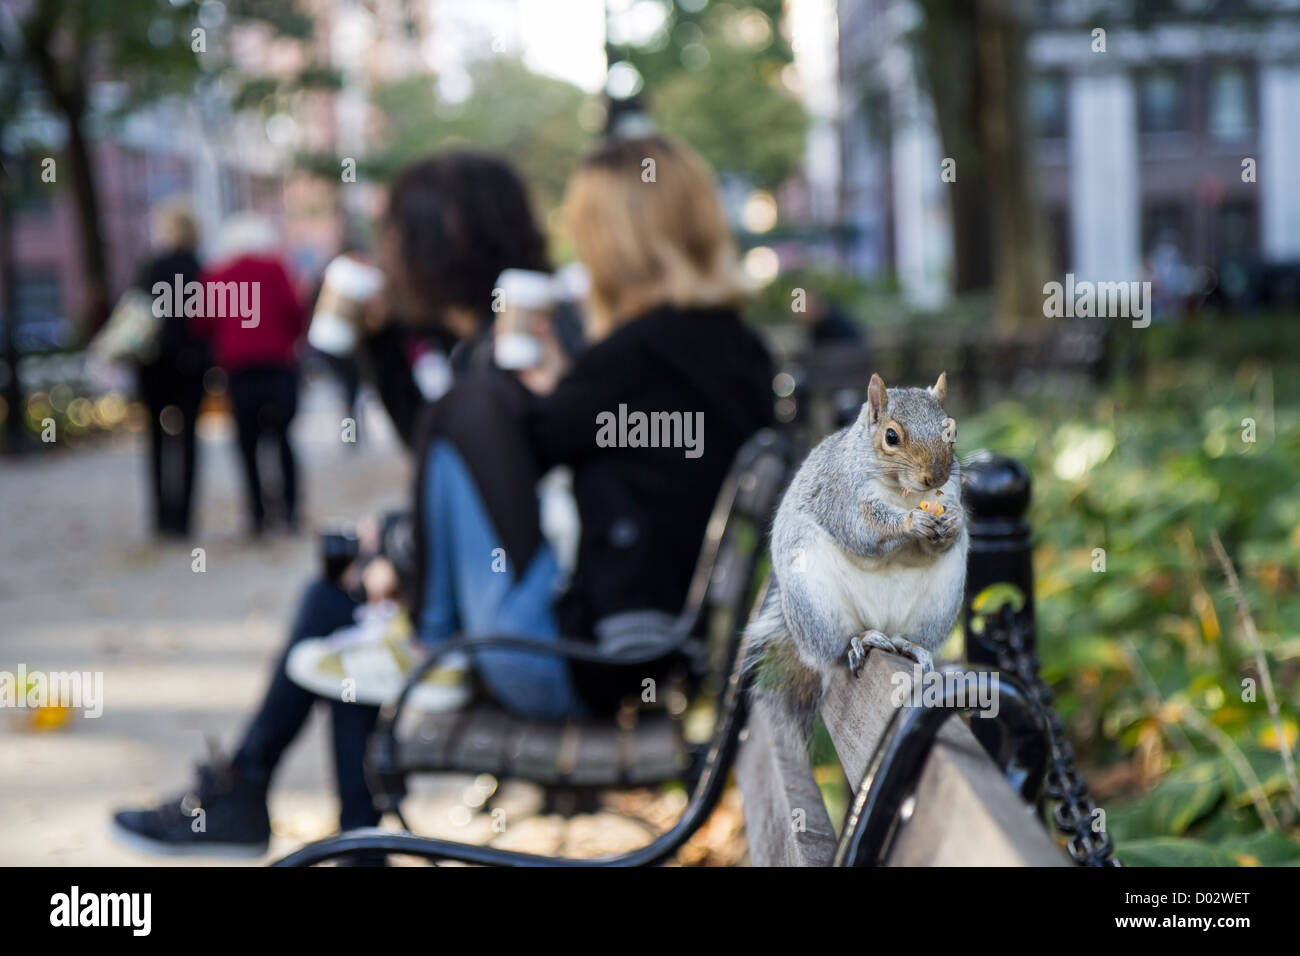 Gray squirrel eating a nut on a bench in Union Square Park New York Stock Photo